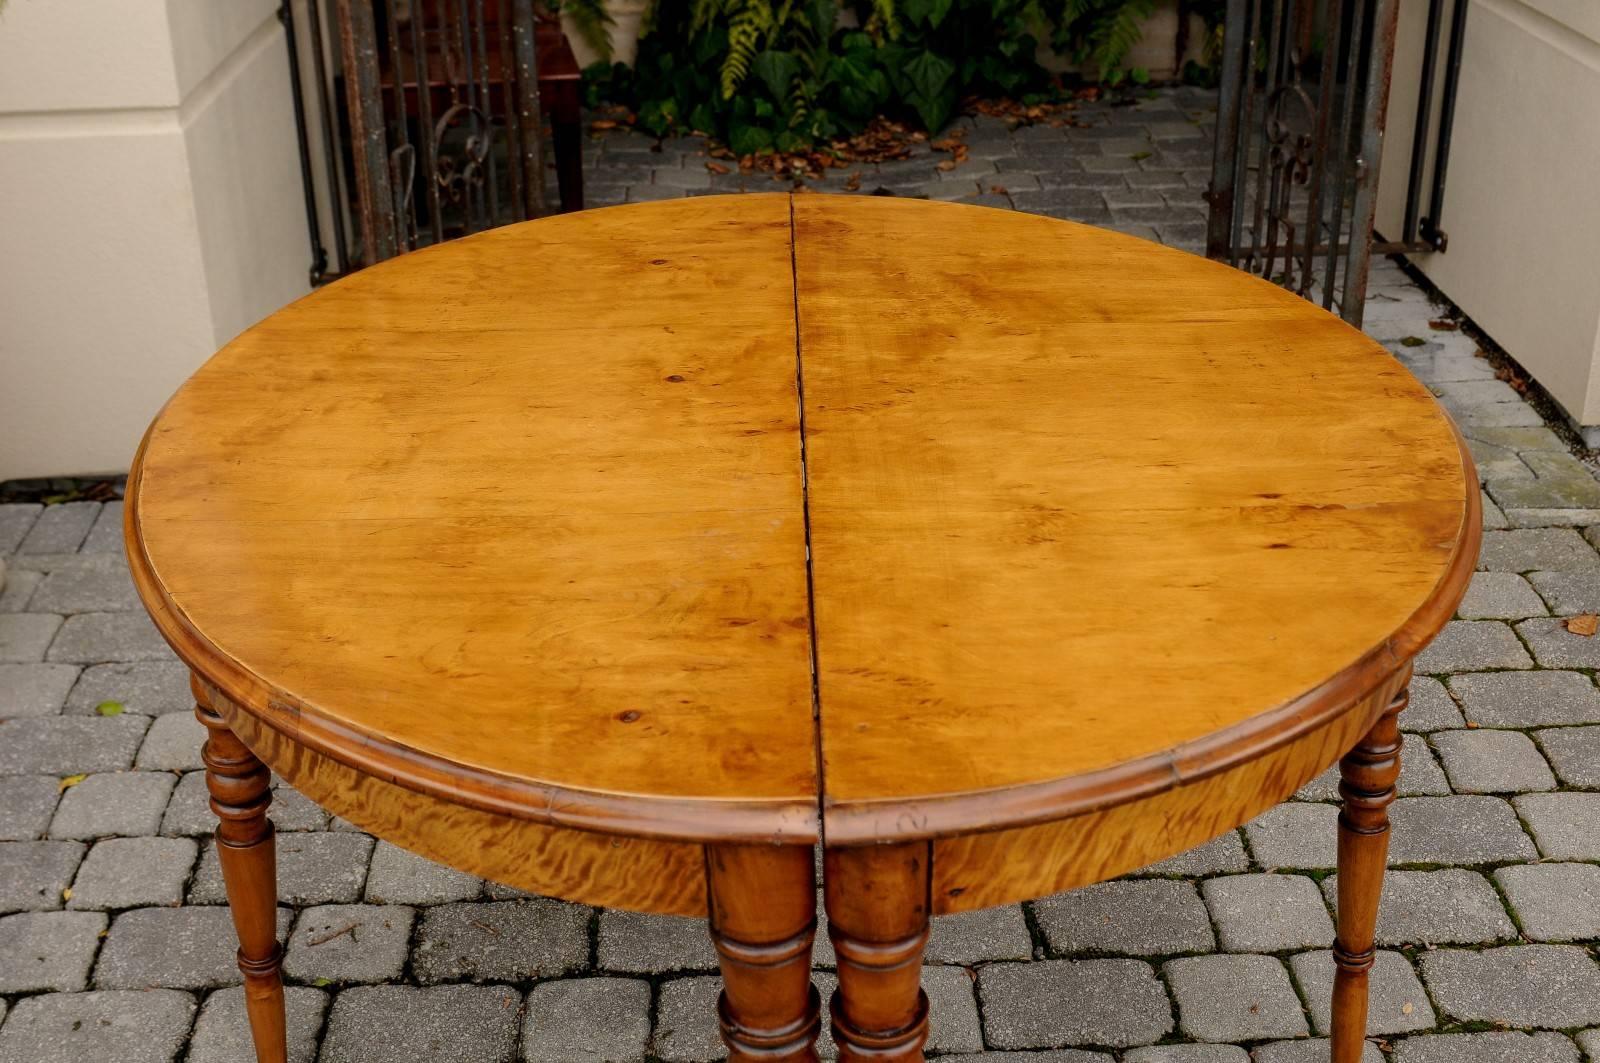 19th Century Pair of French Maple Demilune Tables with Turned Legs from the 1840s For Sale